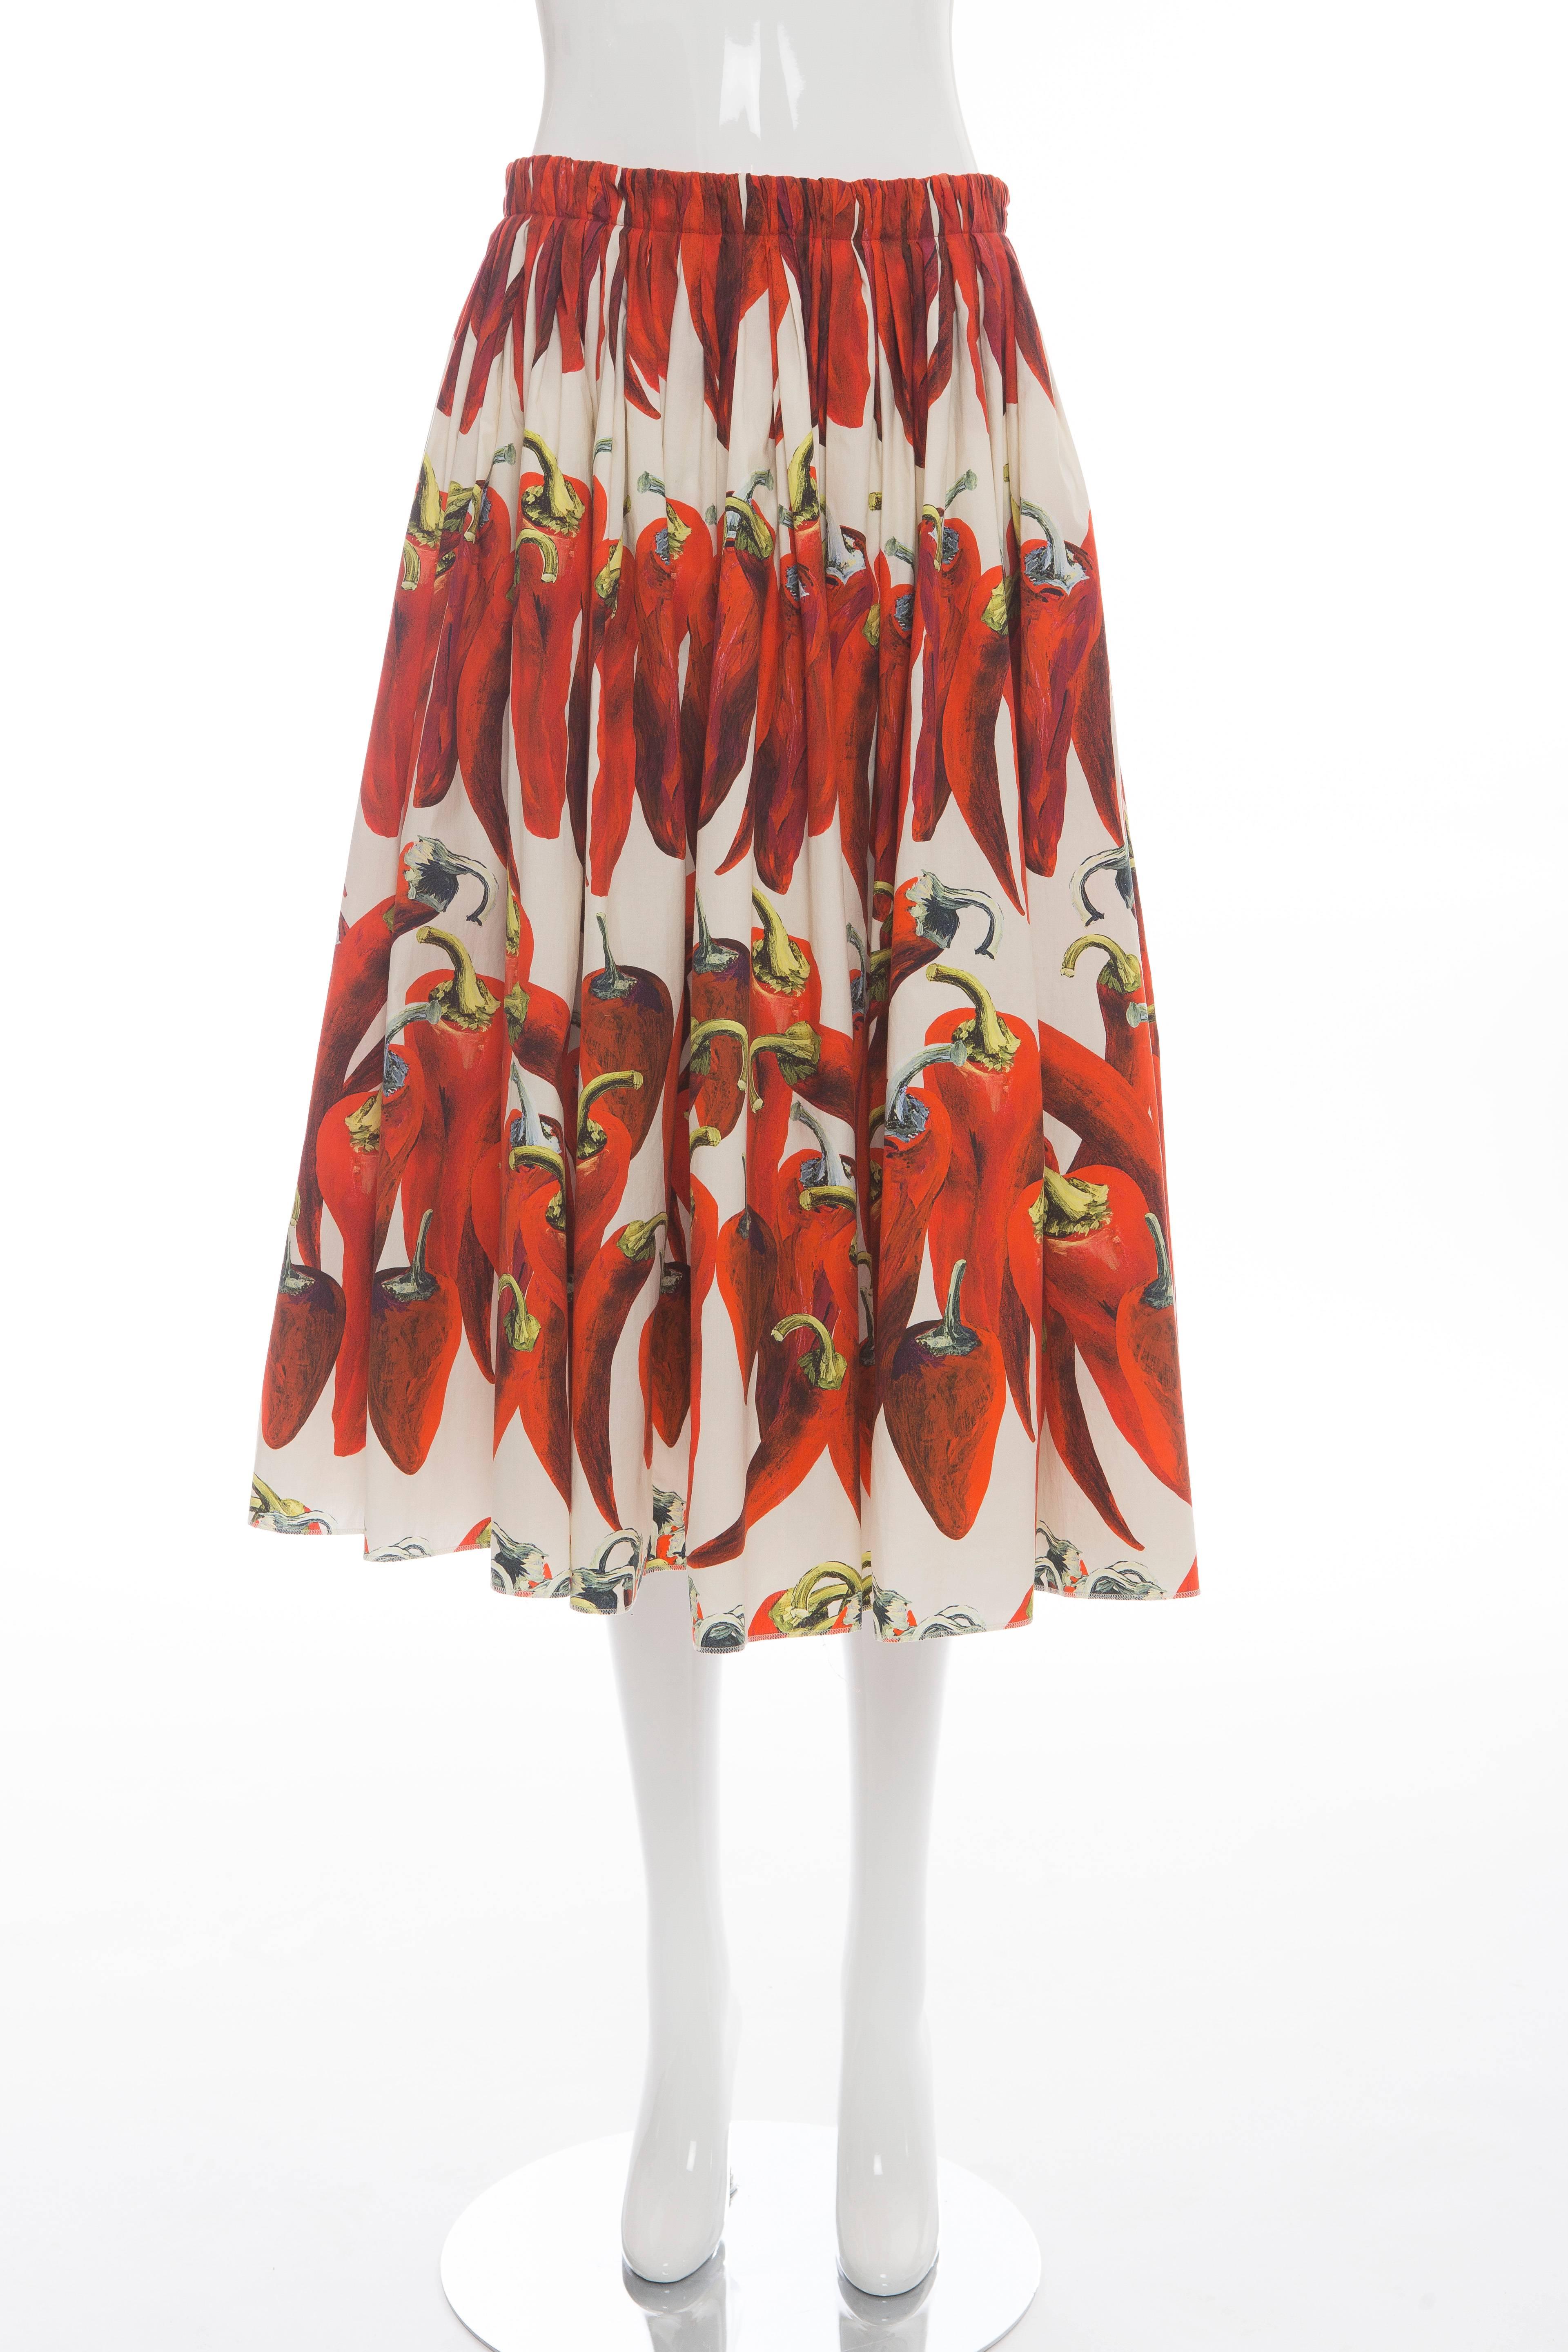 Dolce & Gabbana, Spring 2012 cotton pleated chili pepers skirt with back zip and hook closure.

IT. 40
US. 4

Waist 28